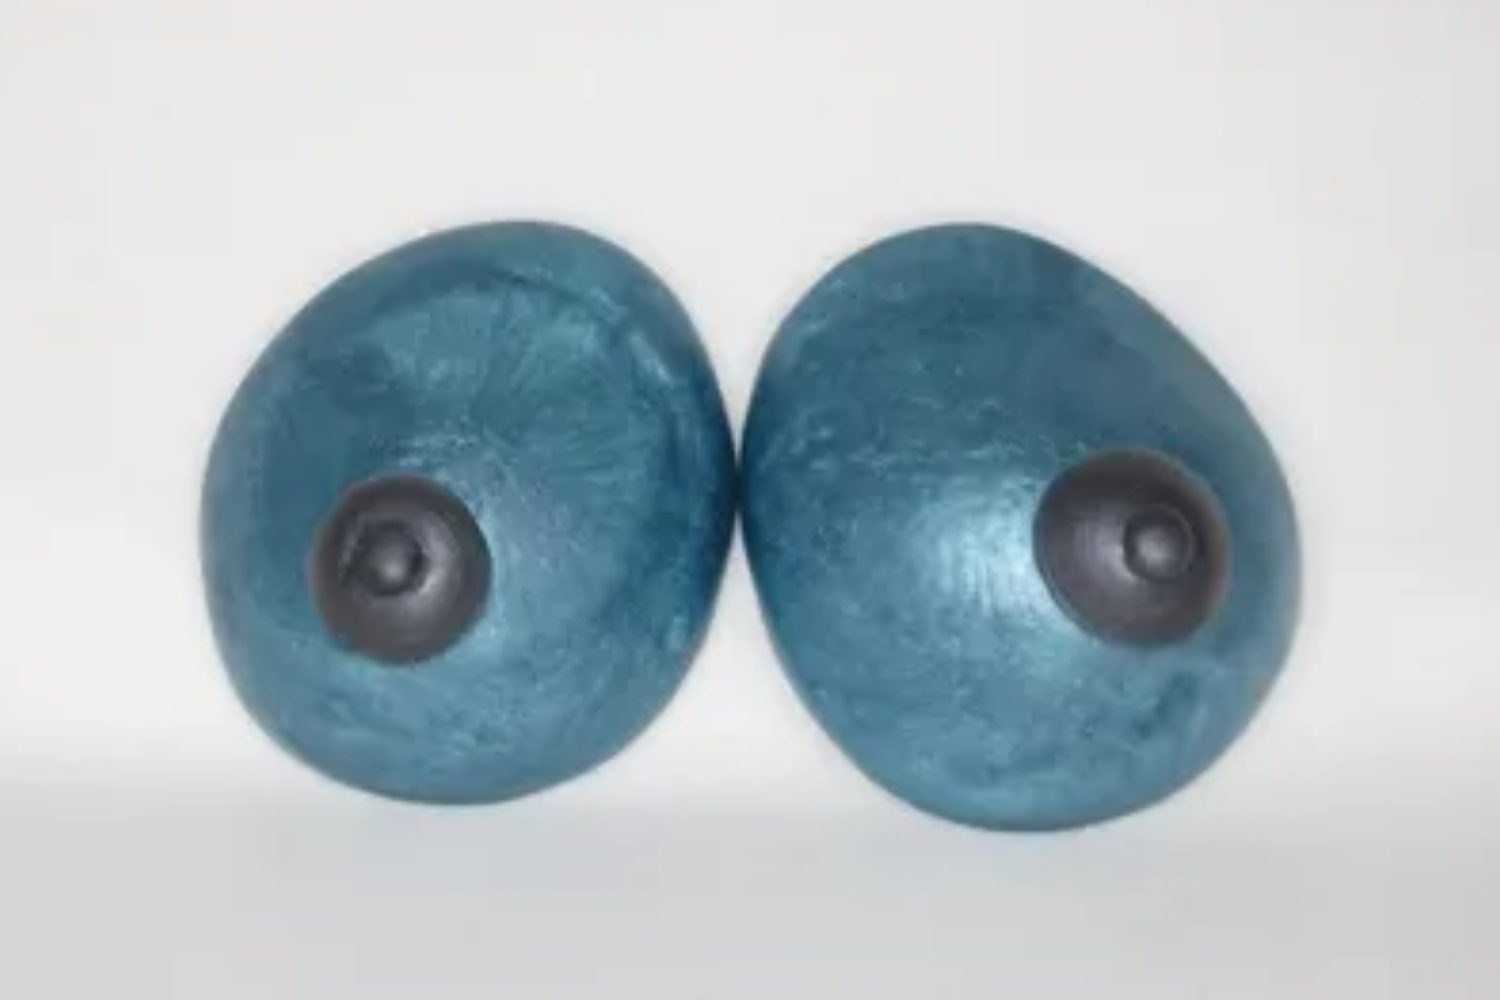 A pair of blue breasts with black eyes.